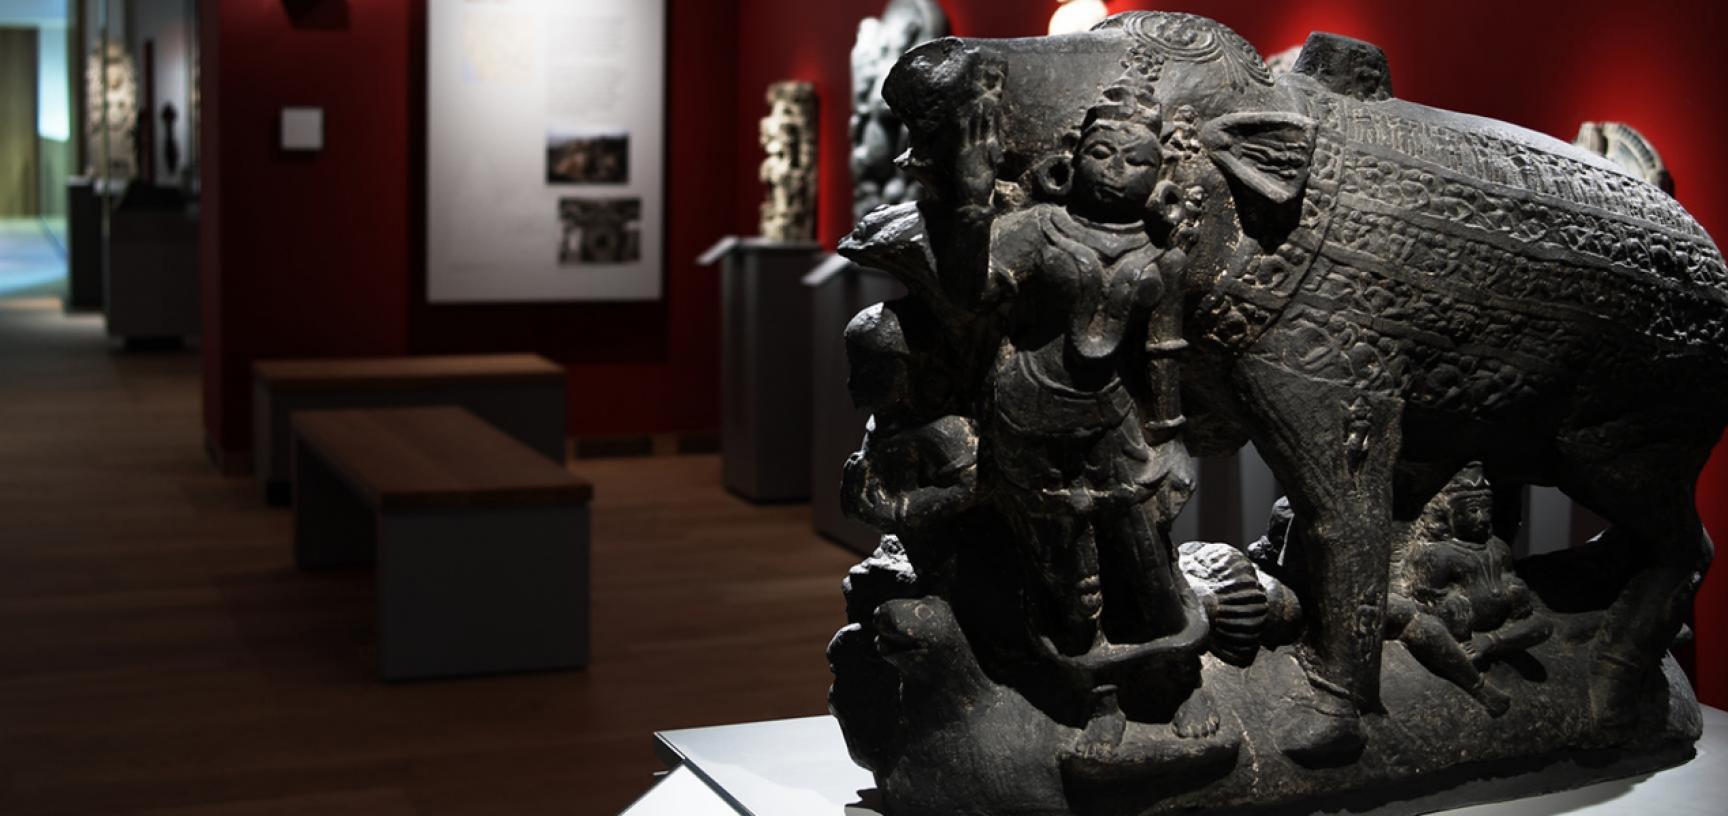 The India from AD 600 Gallery at the Ashmolean Museum